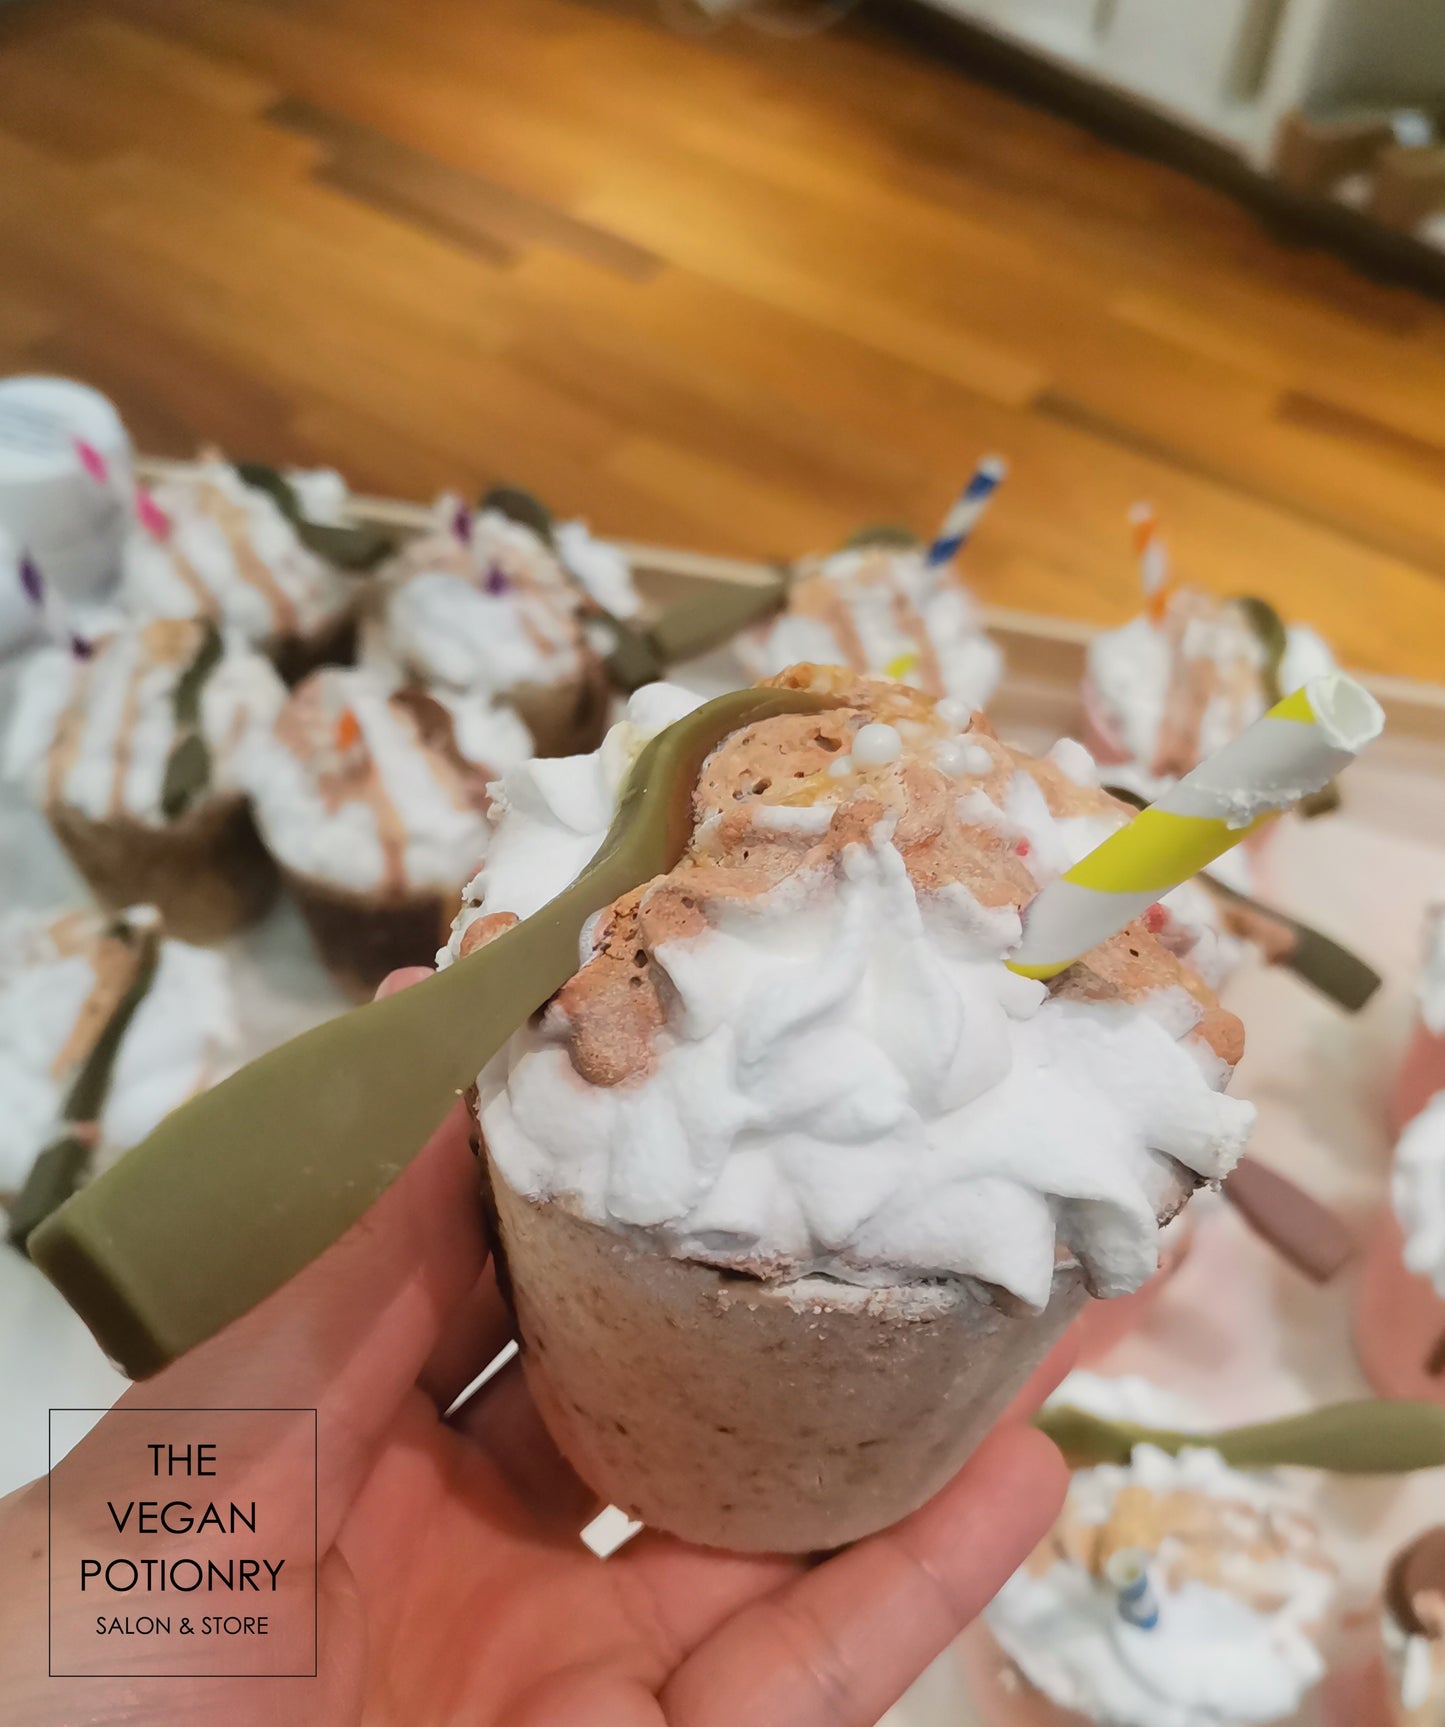 Coffee Latte, Espresso & Frappuccino Bubbling Bath Bombs with toys inside | The Vegan Potionry |